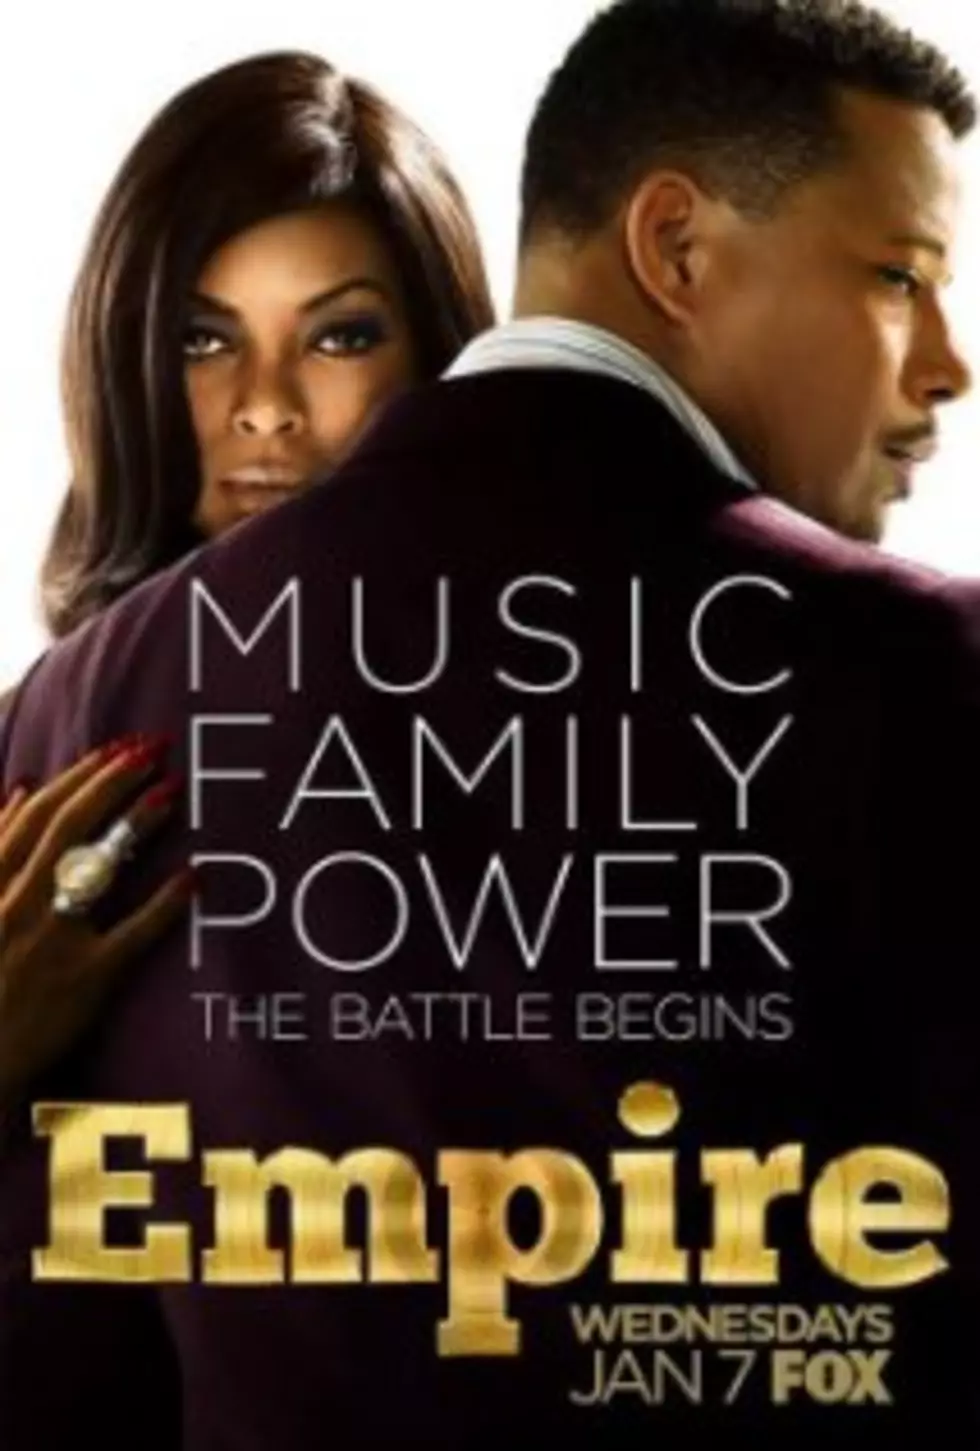 Leo and Rebecca Talk about EMPIRE and Play Clips [Audio]